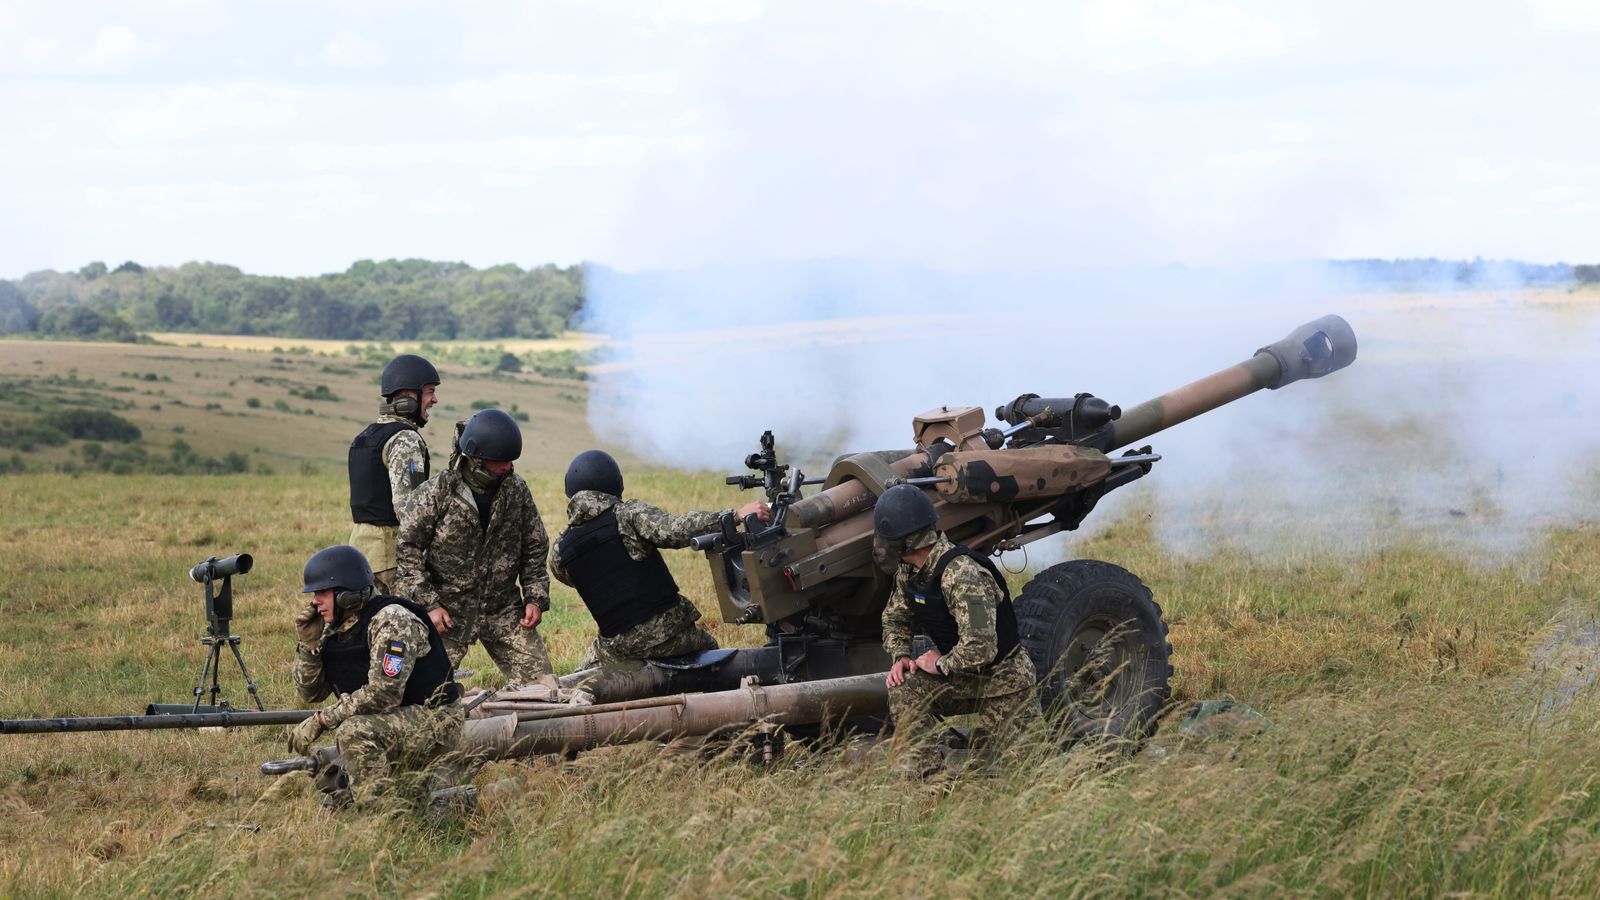 James Heappey says UK should consider sending troops to Ukraine - but away from the frontline